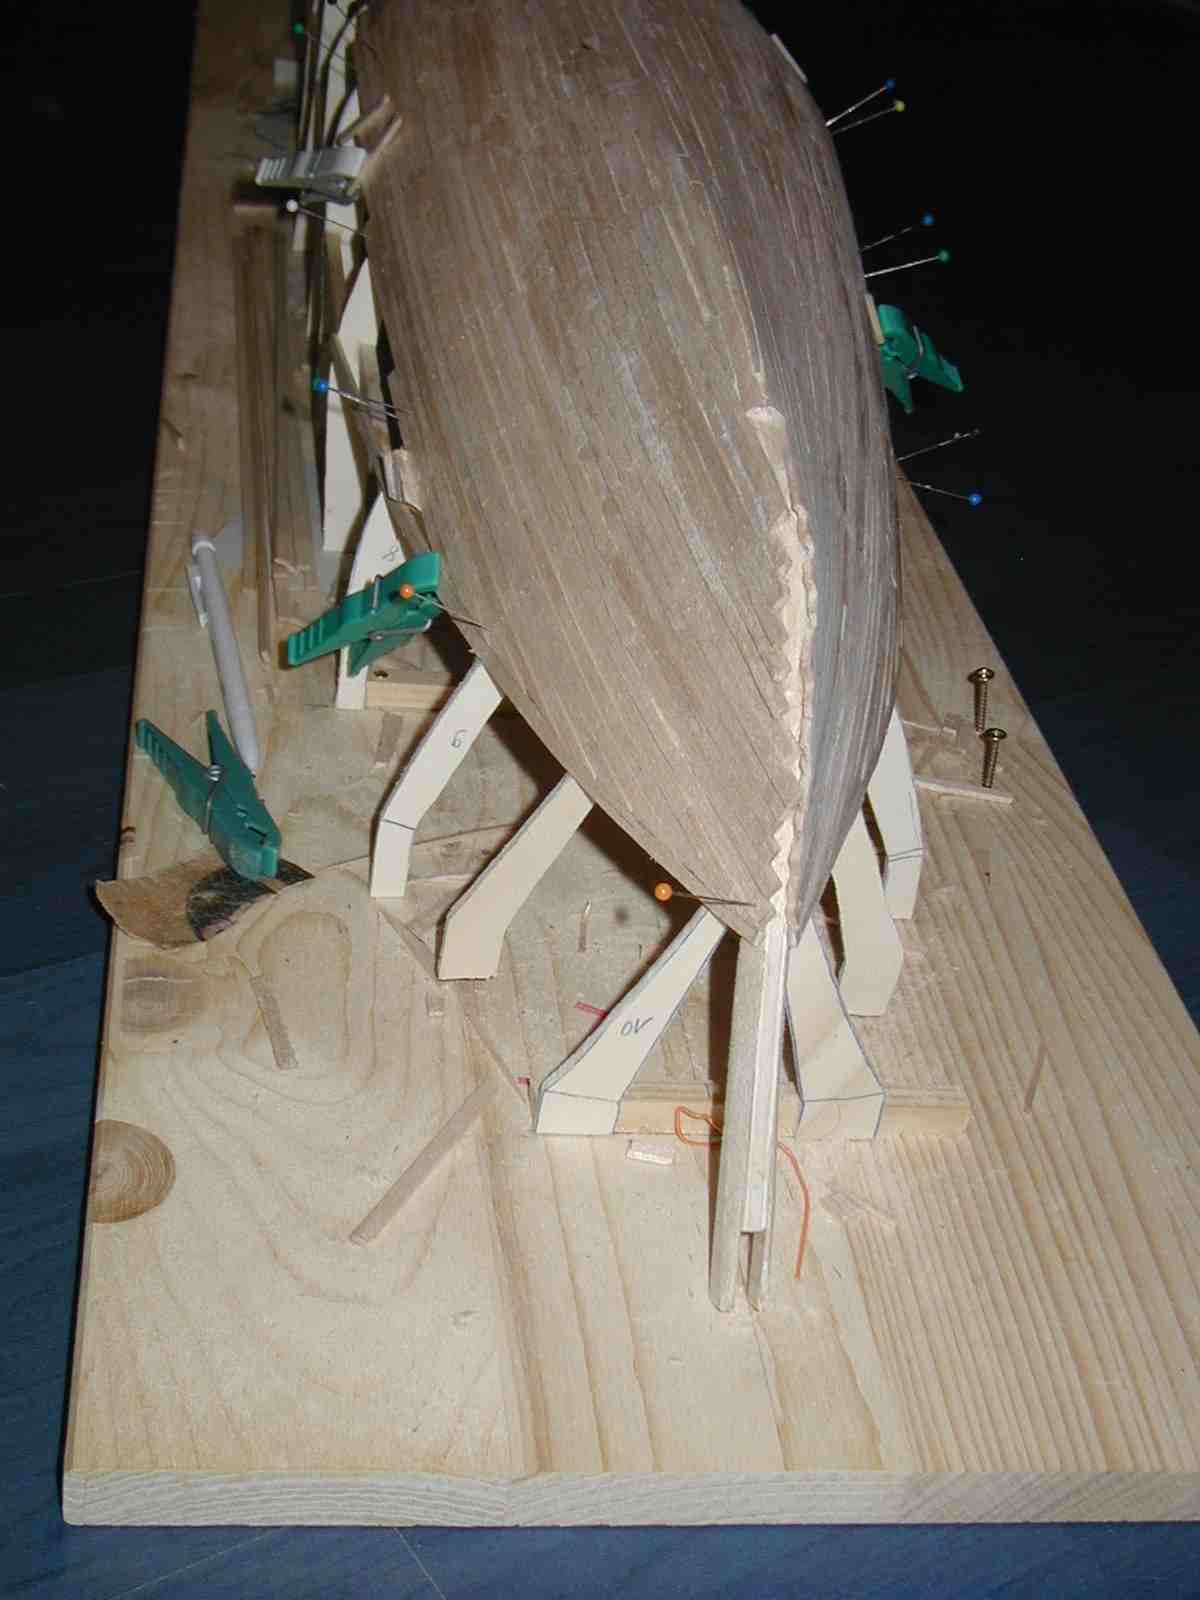 hull partly planked